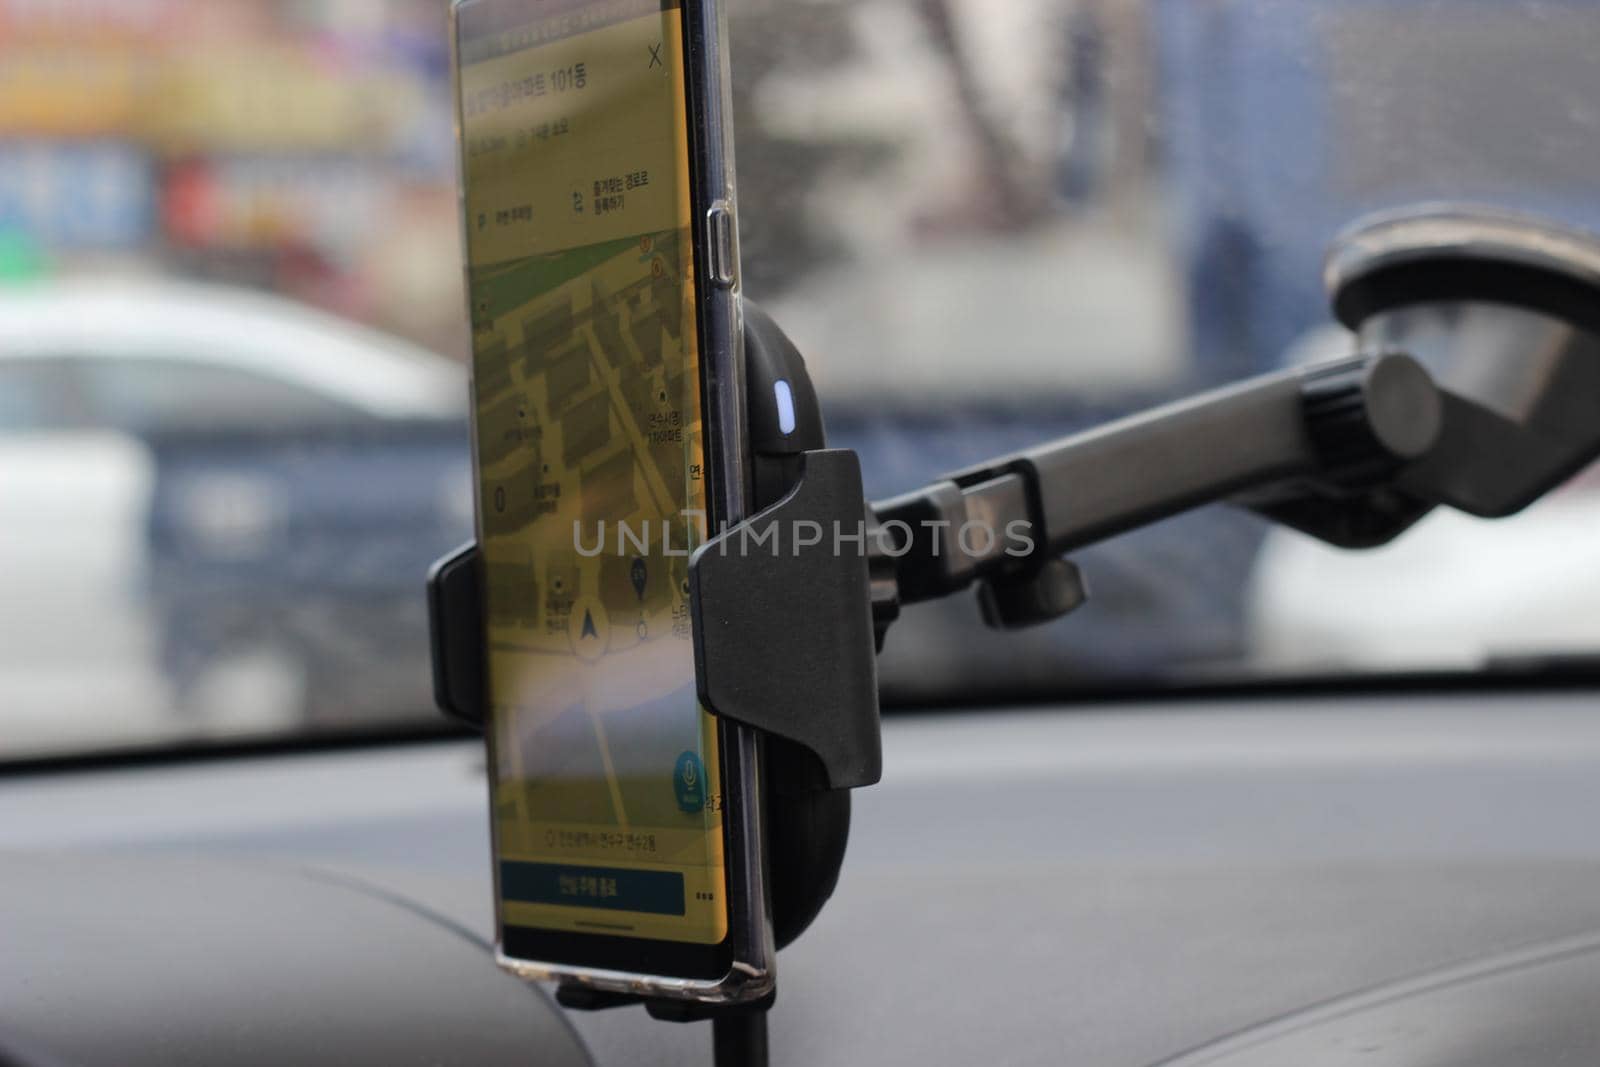 Smart phone hold by black holder for navigation. The mobile holder is attached to windscreen of car